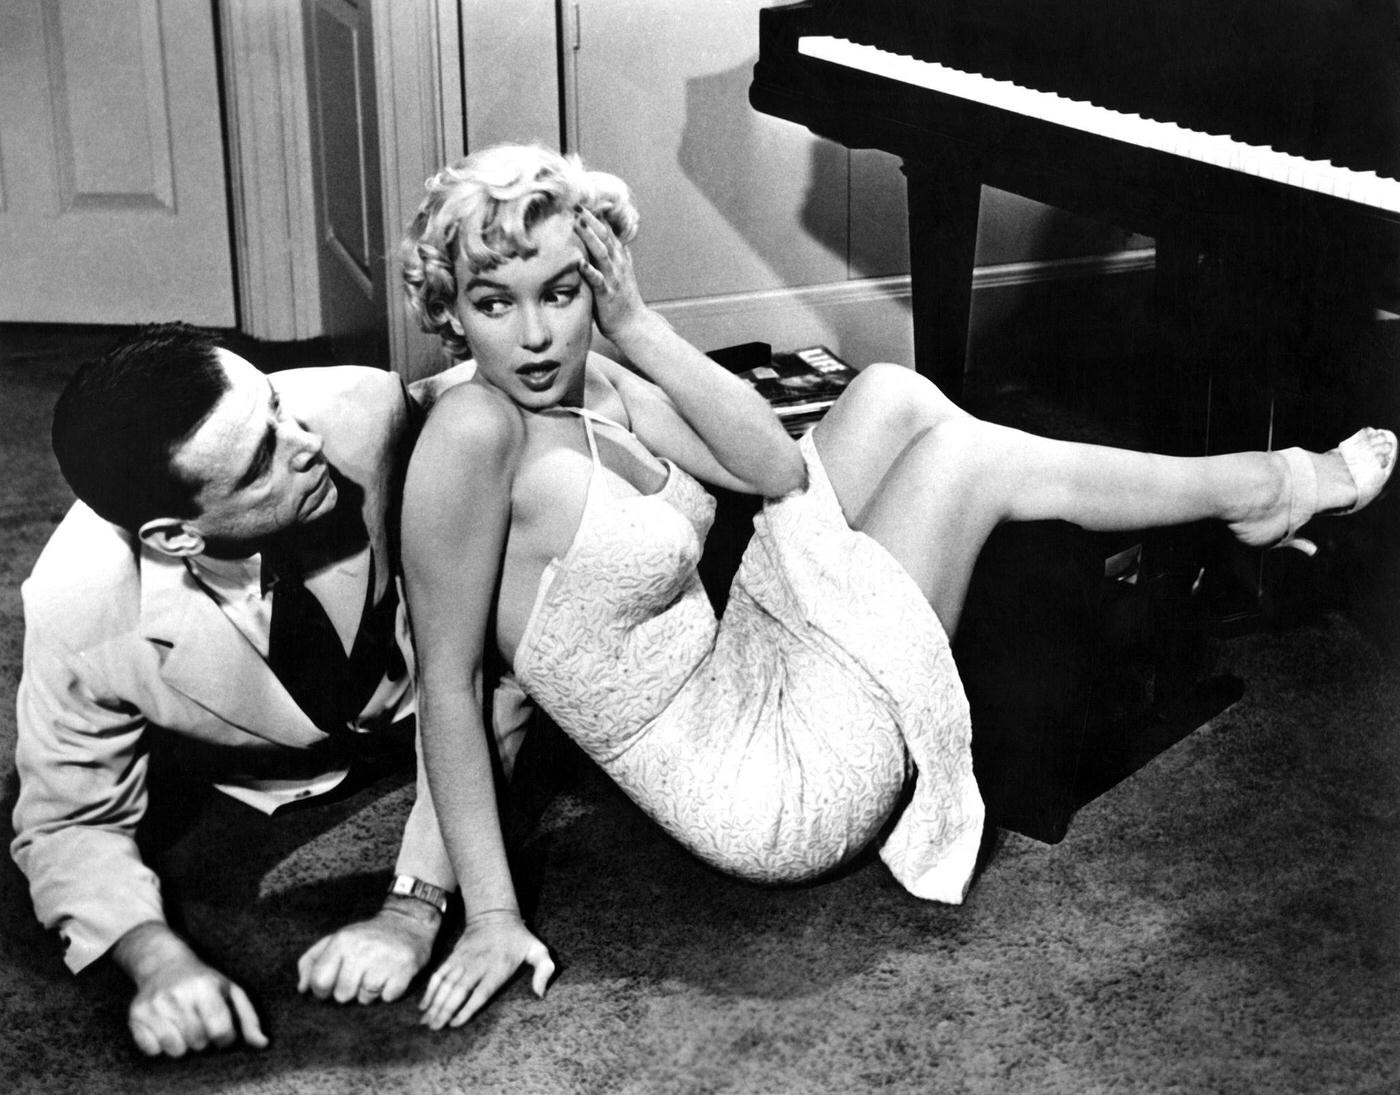 Marilyn Monroe with co-star Tom Ewell in 1954 during the filming of "The Seven Year Itch" in Los Angeles